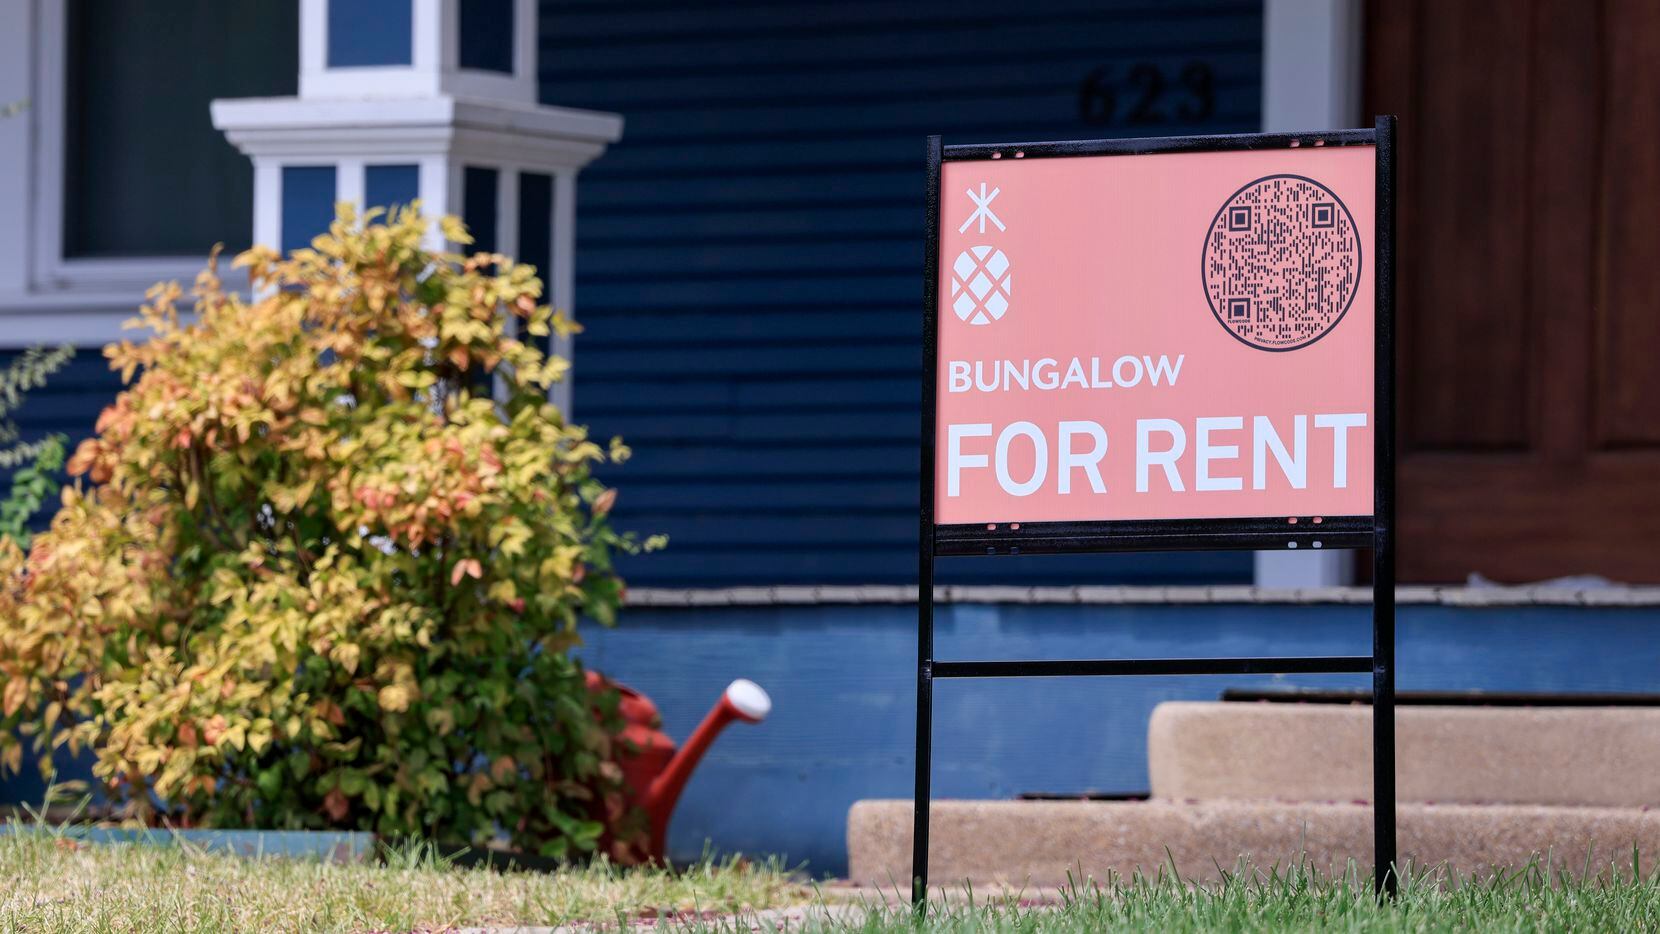 A sign advertises a house for rent in Dallas, Saturday, July 9, 2022.